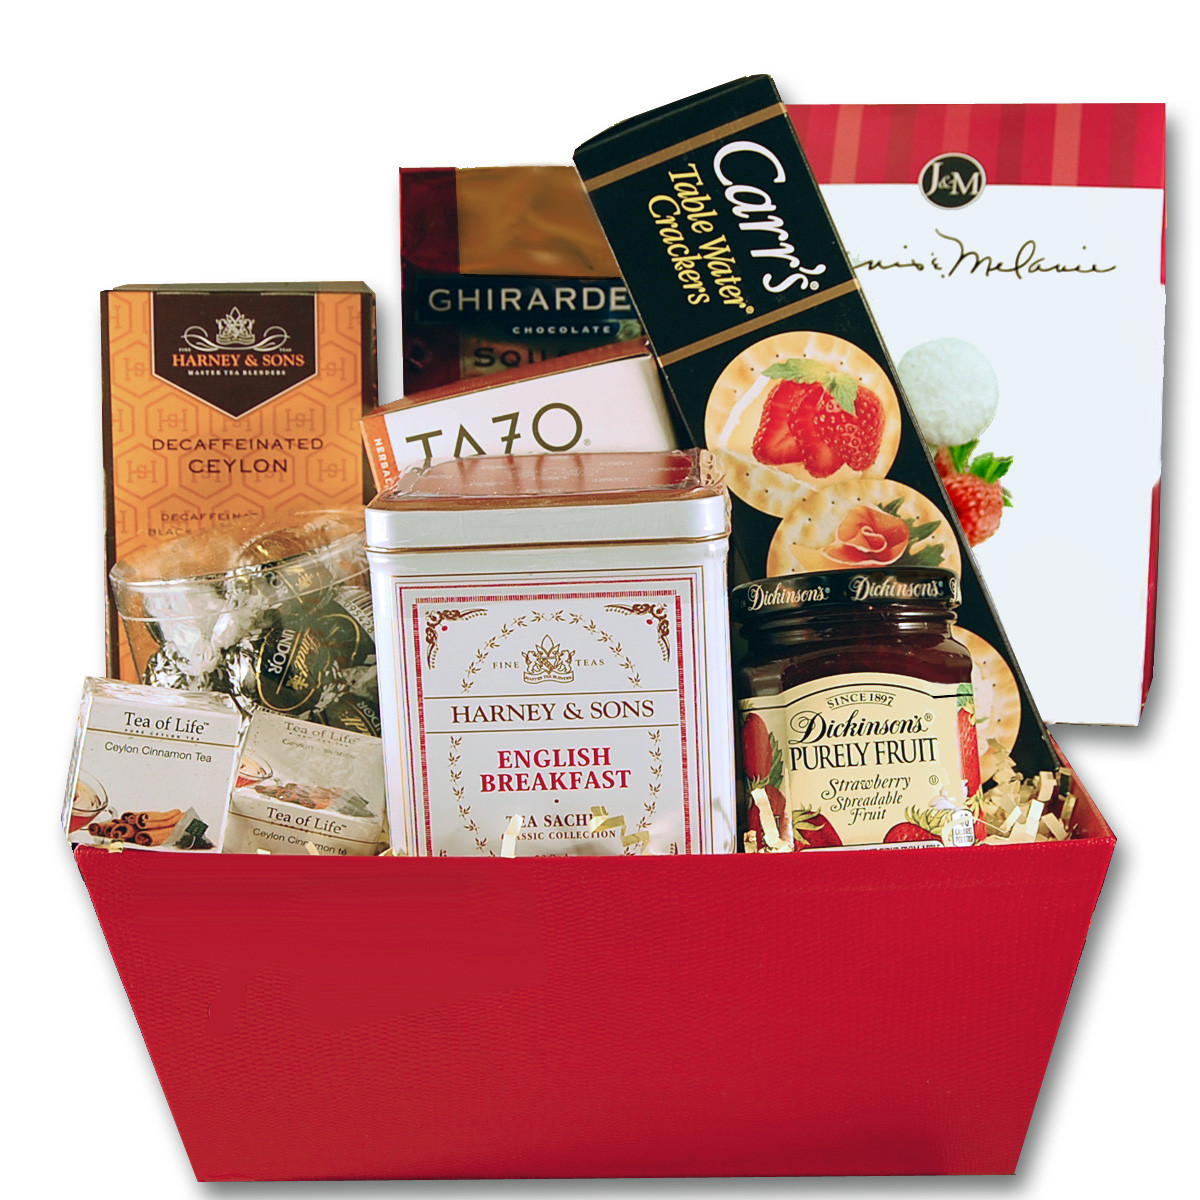 Gift basket arrangement filled with teas, dessert wafers, confection caramels, dried fruit, and honey
